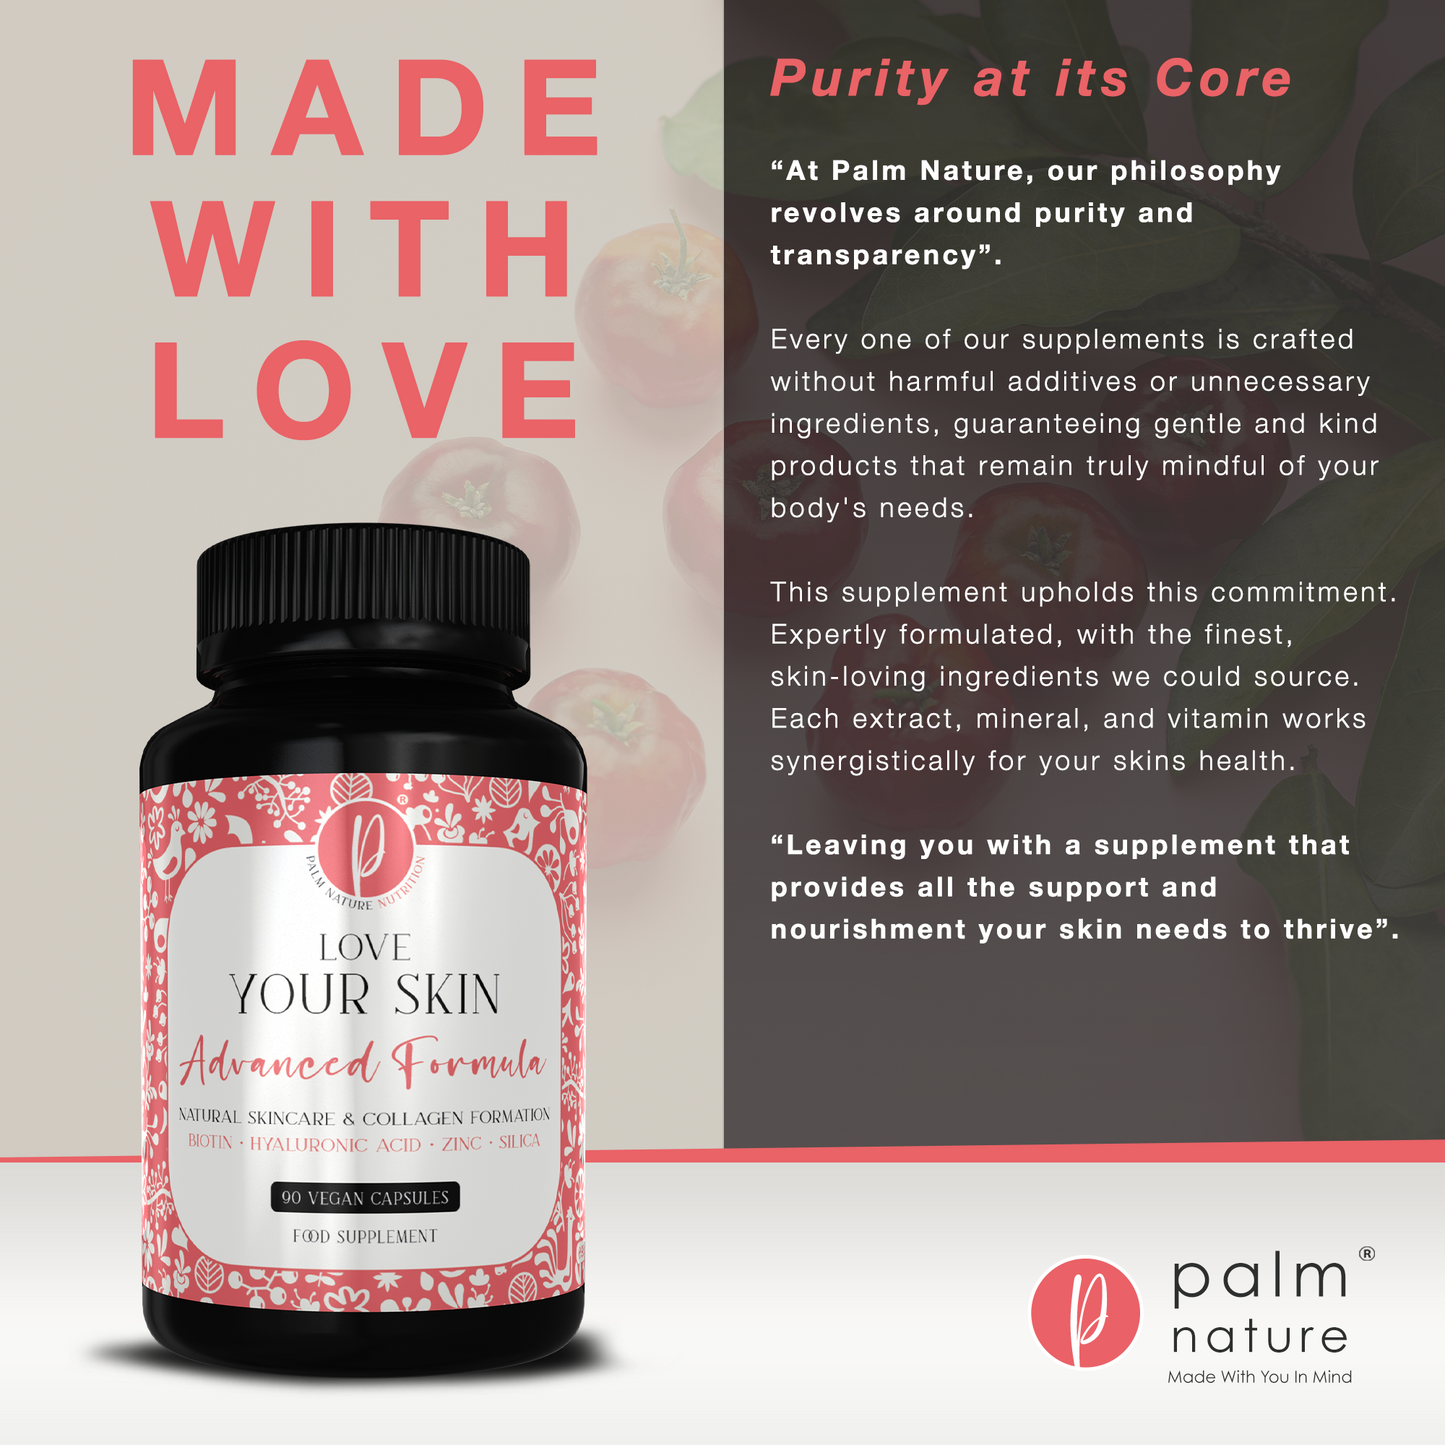 Love Your Skin Beauty Supplement